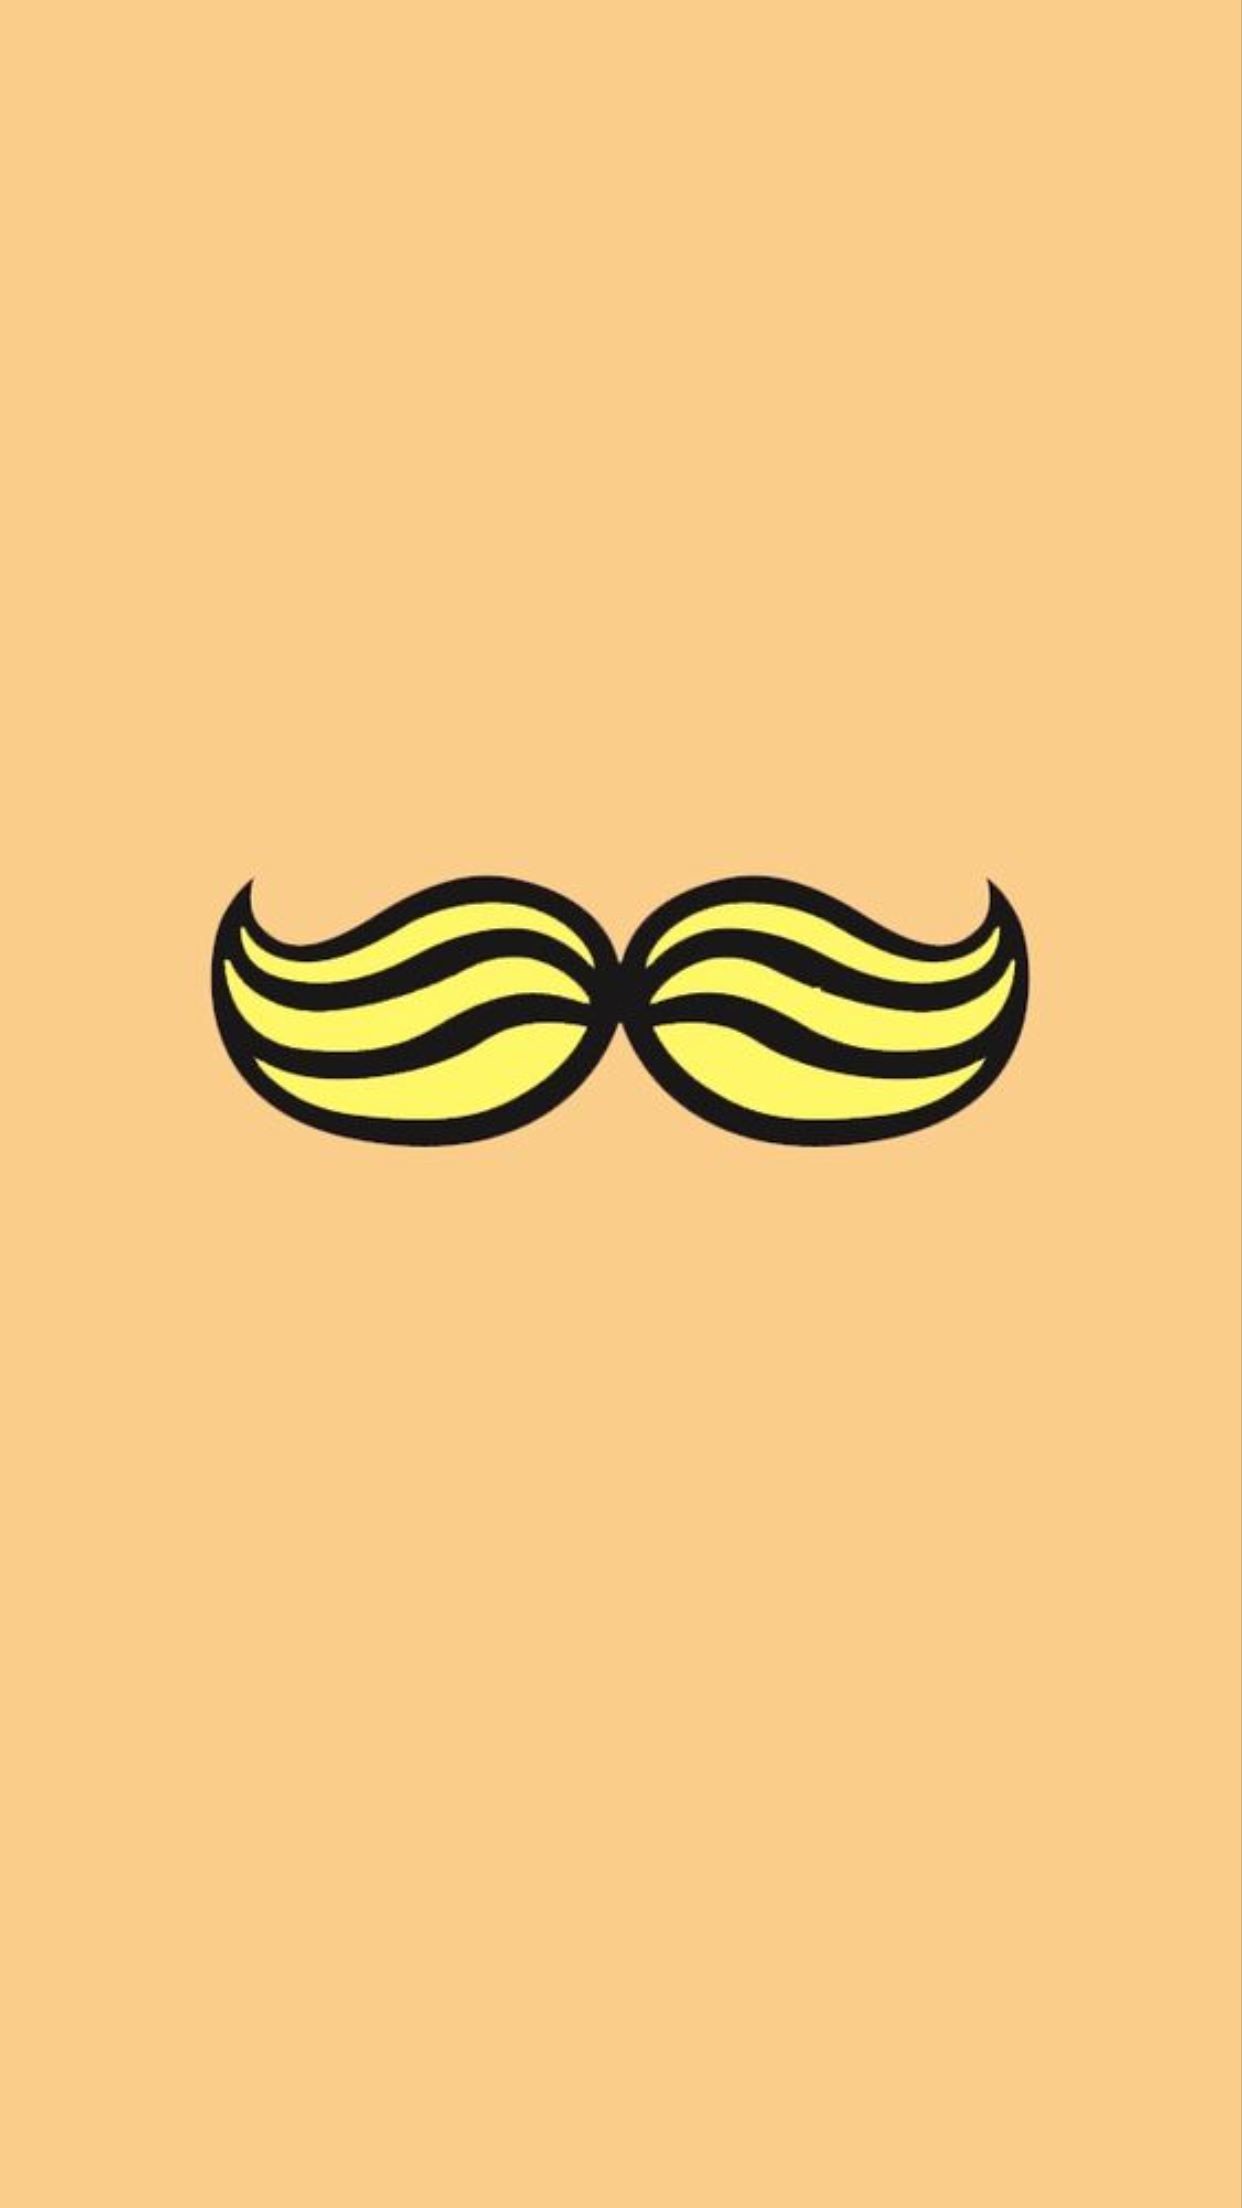 1242x2208 Awesome Mustache Wallpapers for Phones and Walls Mens Stylists